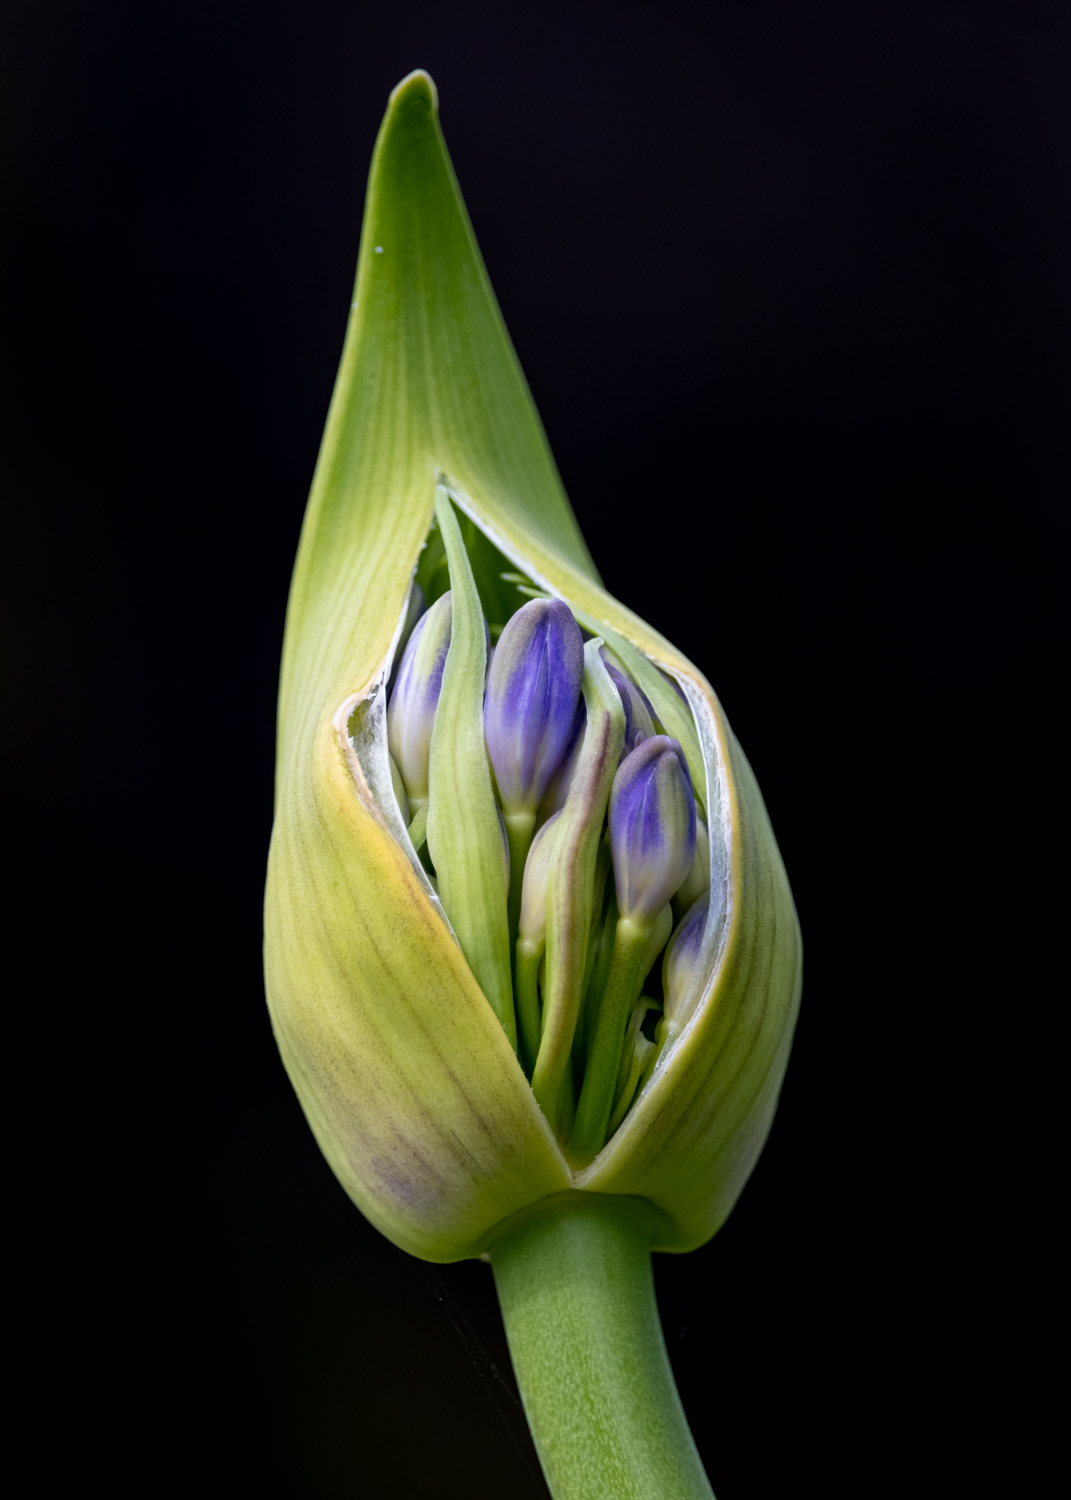 A purple agapanthus flower emerging from its bud